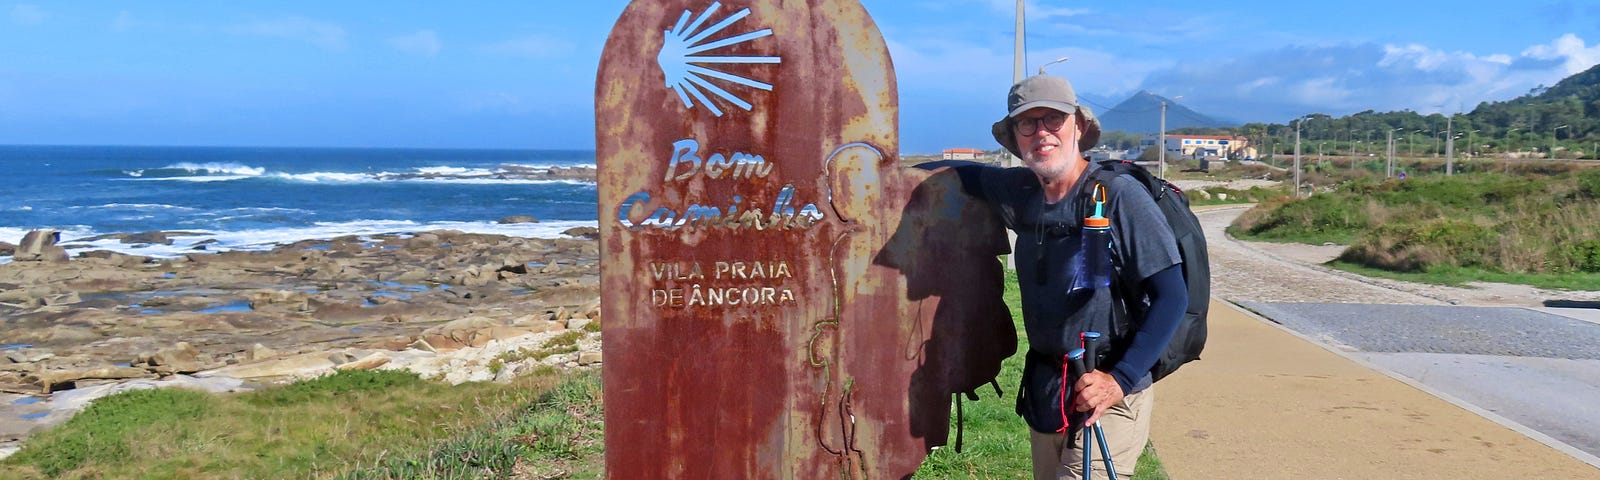 Man wearing a cap, backpack and carrying hiking poles leans against a rusted metal sign with a cutout of the Camino scallop shell and the words Bom Cominho and Vila Praia de Ancora. (Good Journey and Village Beach of Ancora)